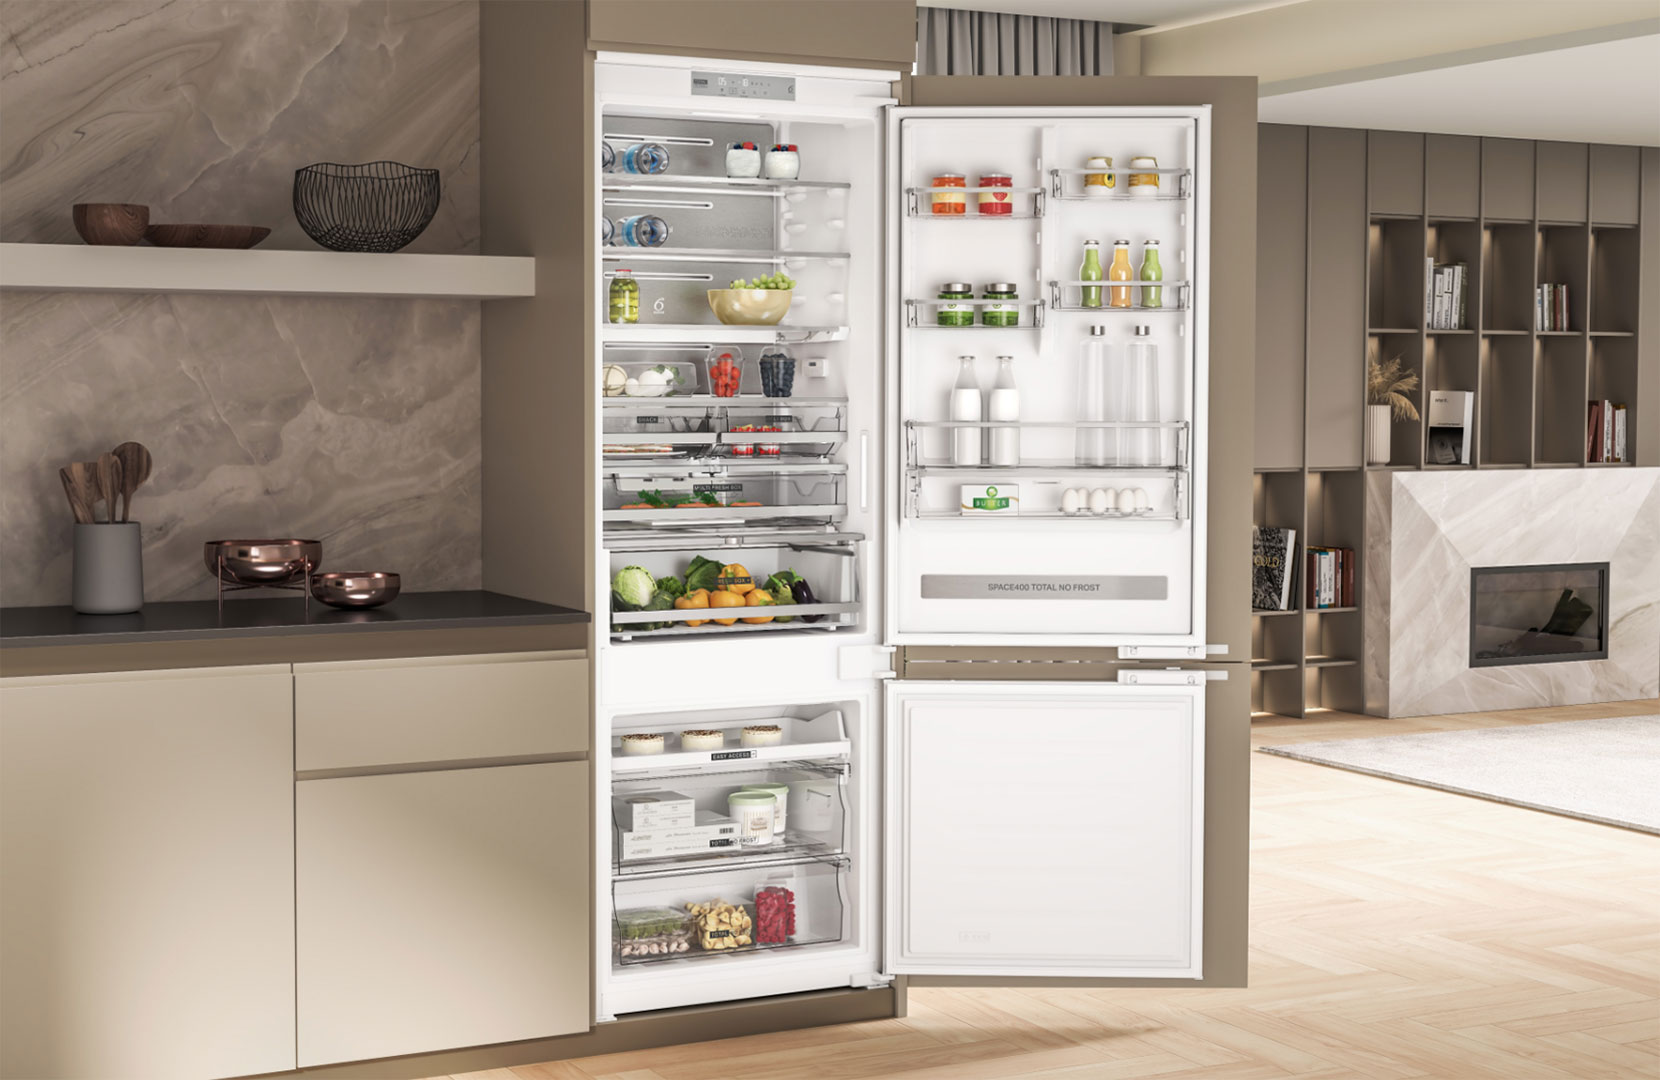 Space400 Total No Frost refrigerator by Whirlpool, for carefree storage